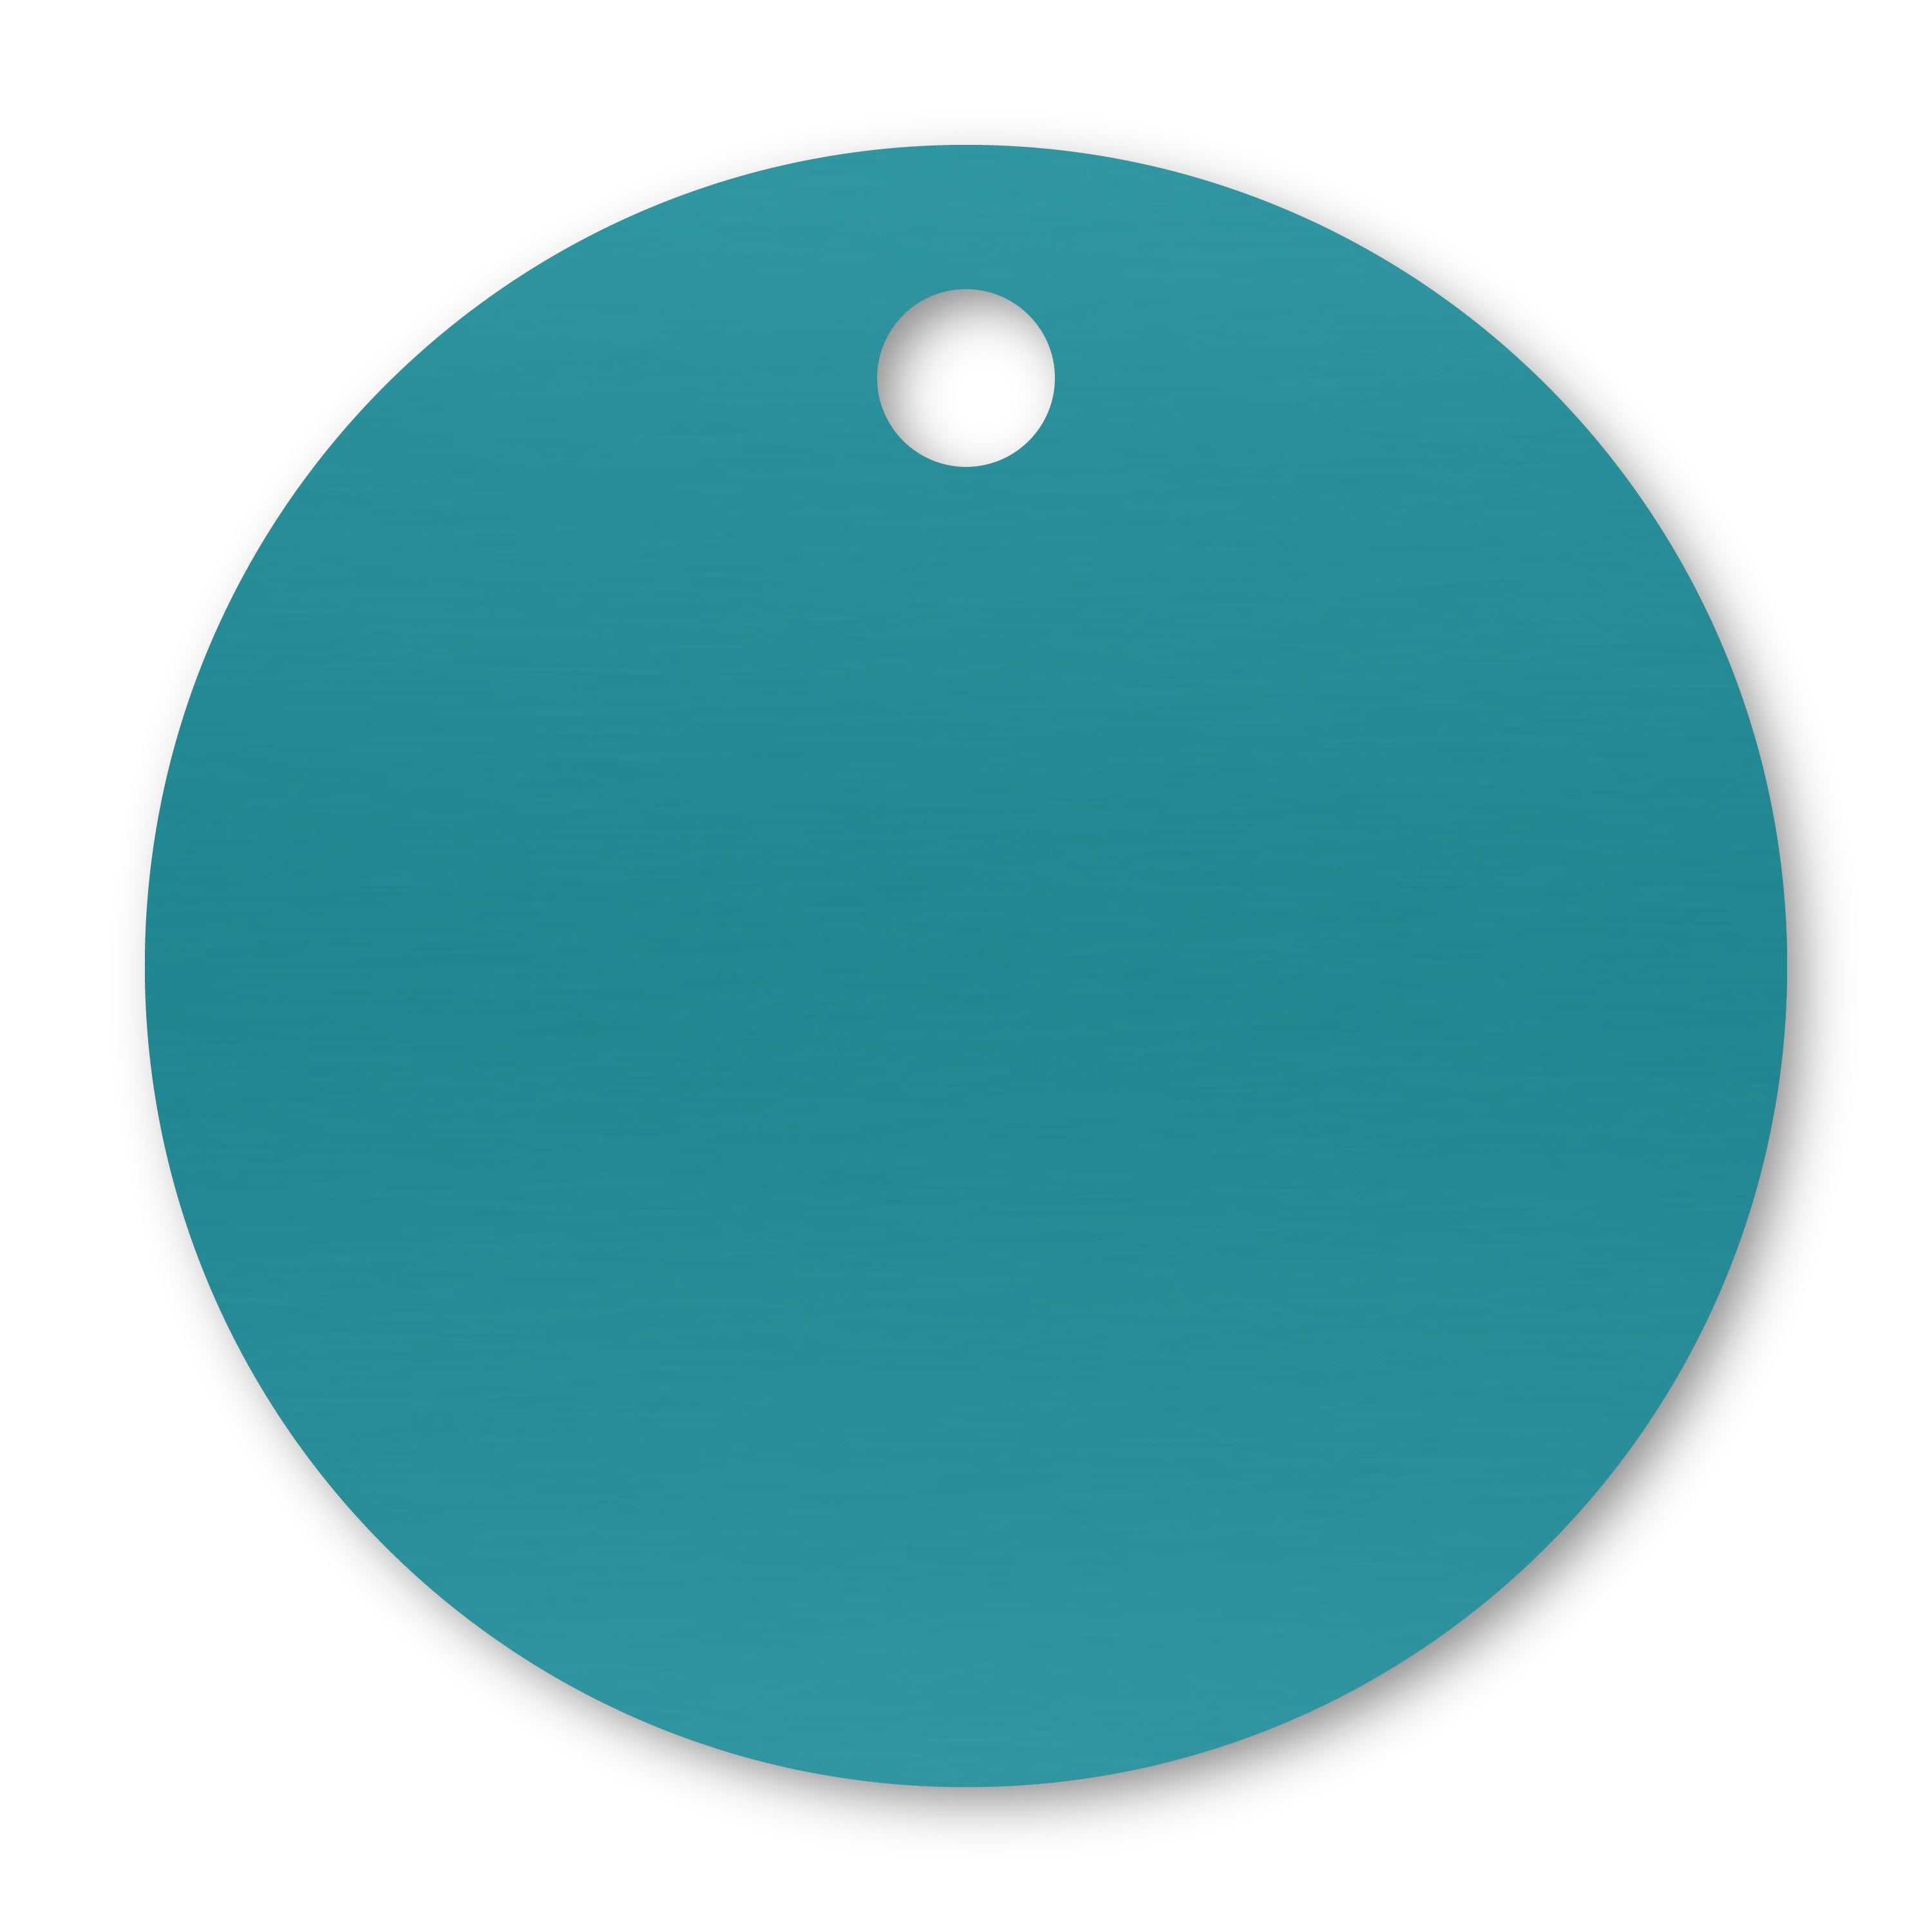 Anodized Aluminum Round Tags, 1" with 1/8" Hole, Laser Engraved Metal Tags Craftworks NW Turquoise 